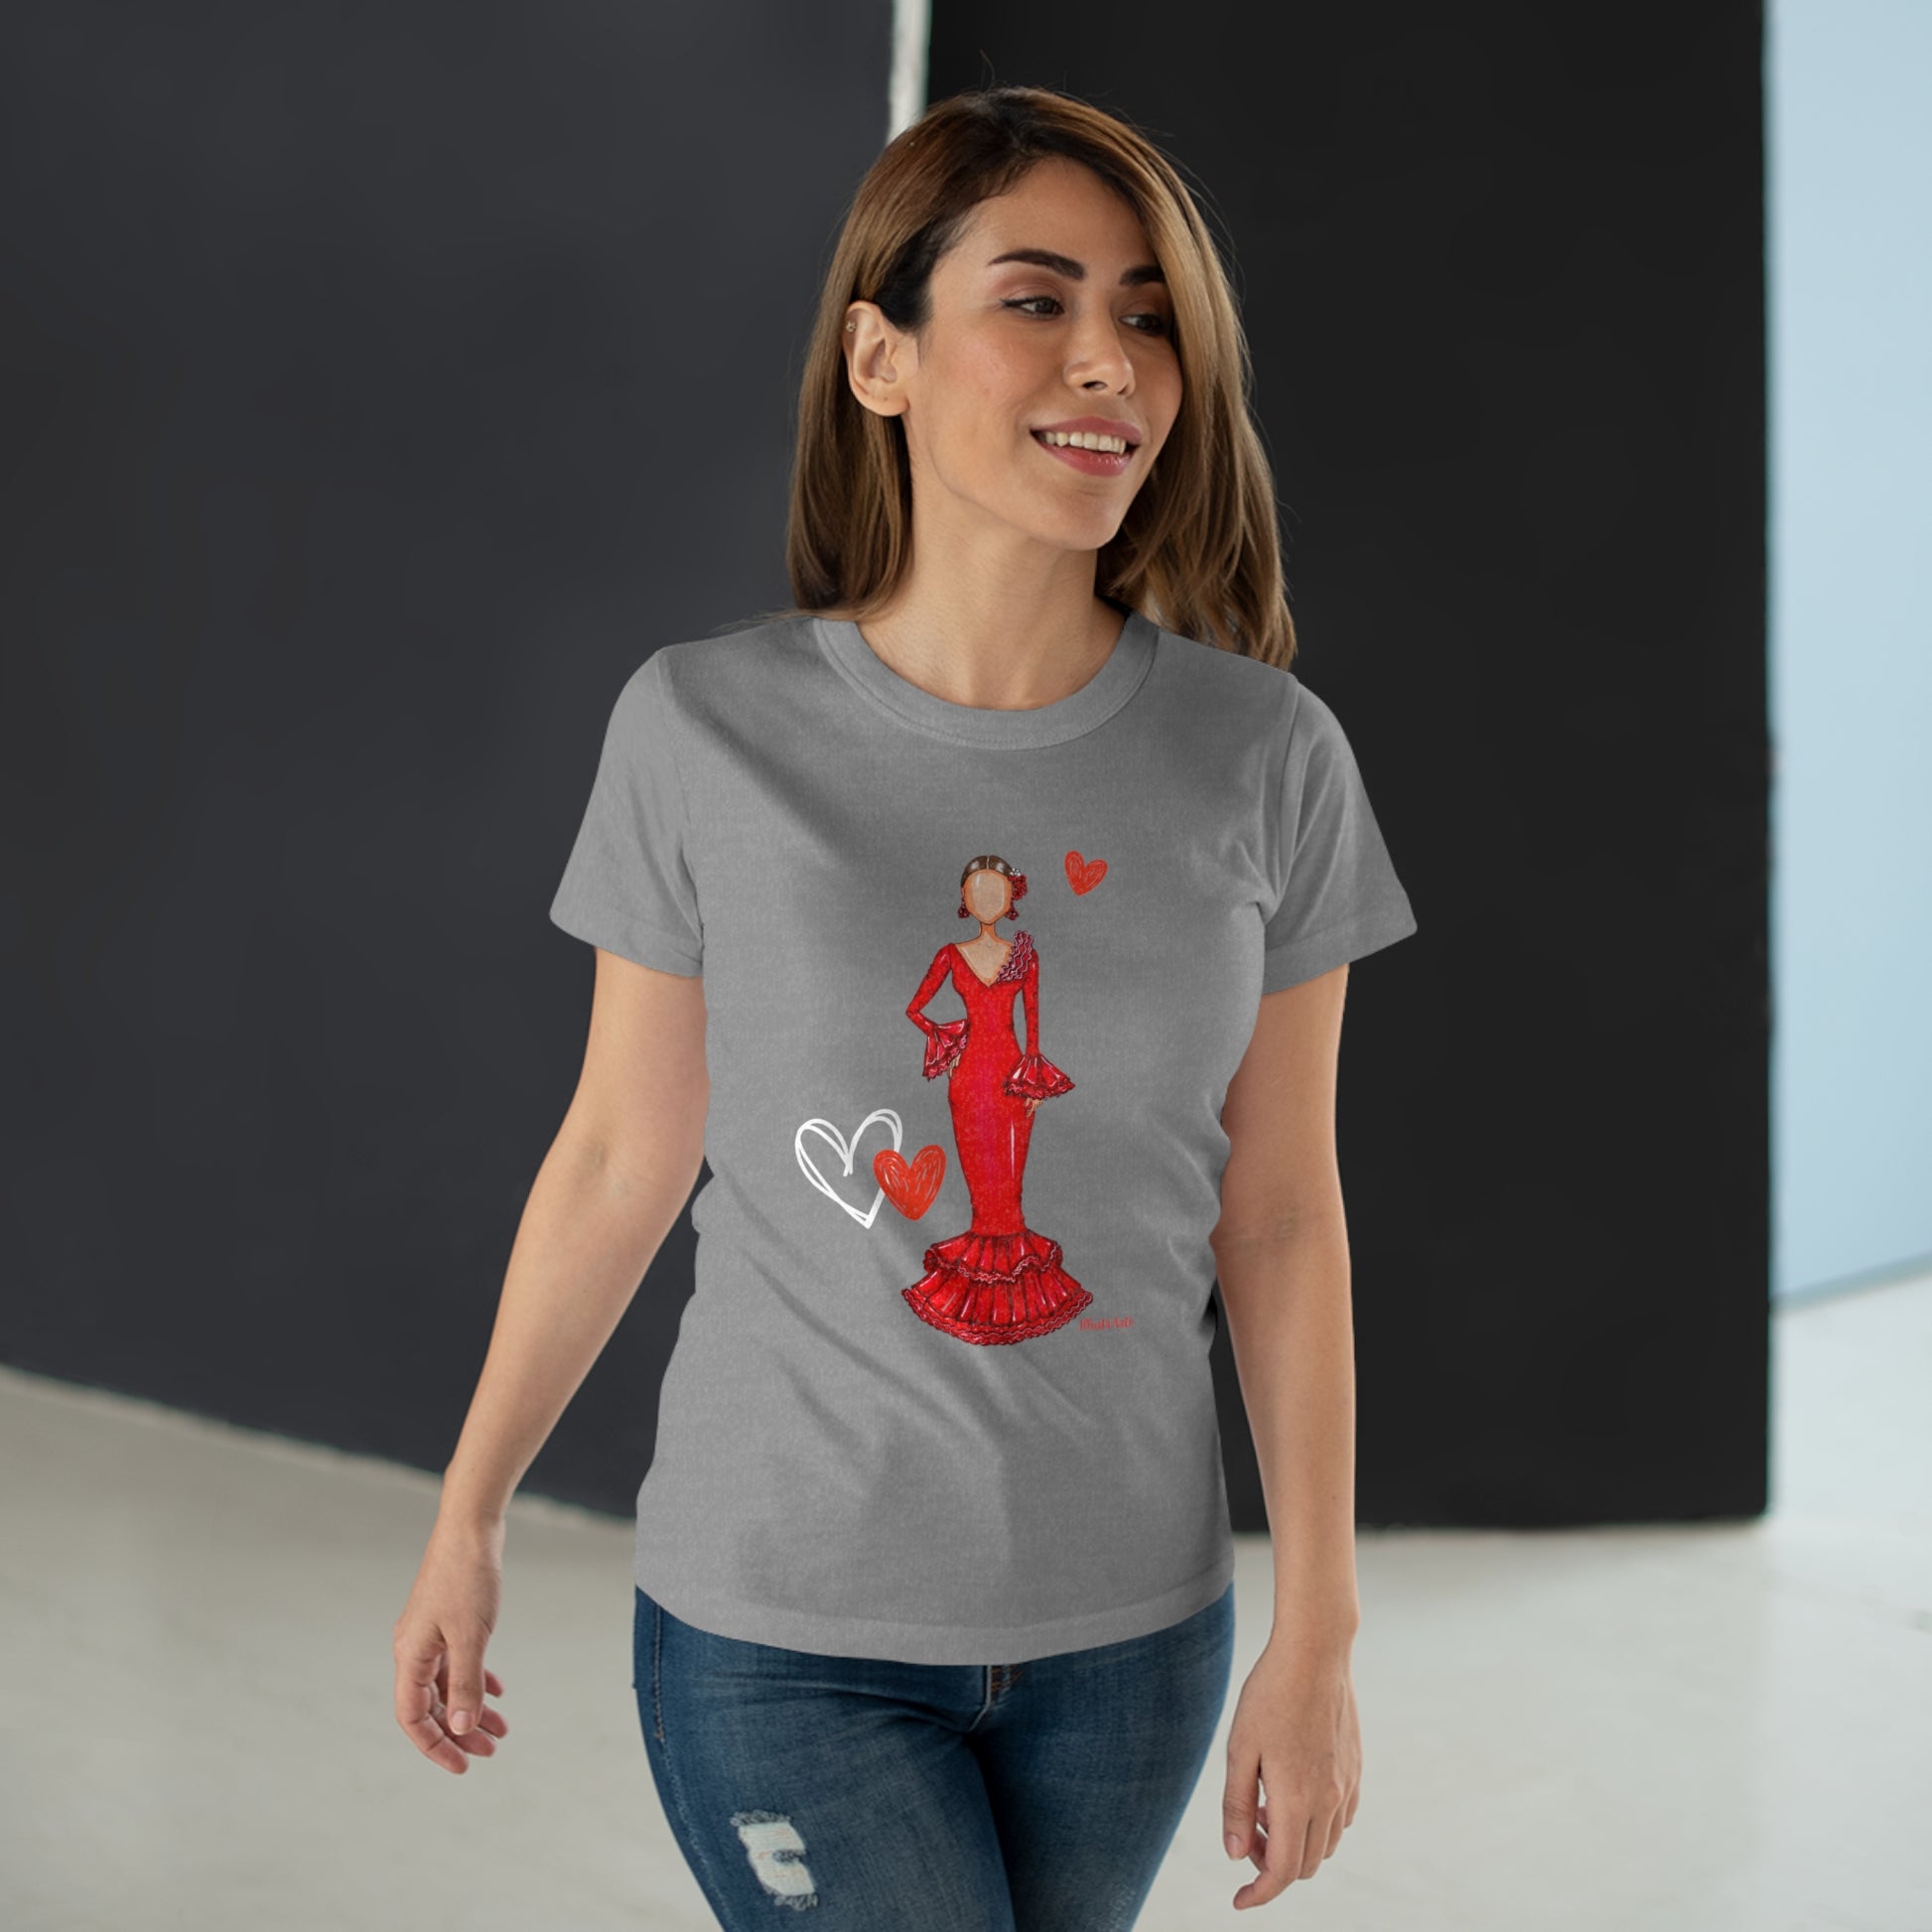 a woman wearing a grey t - shirt with a red dress and heart on it